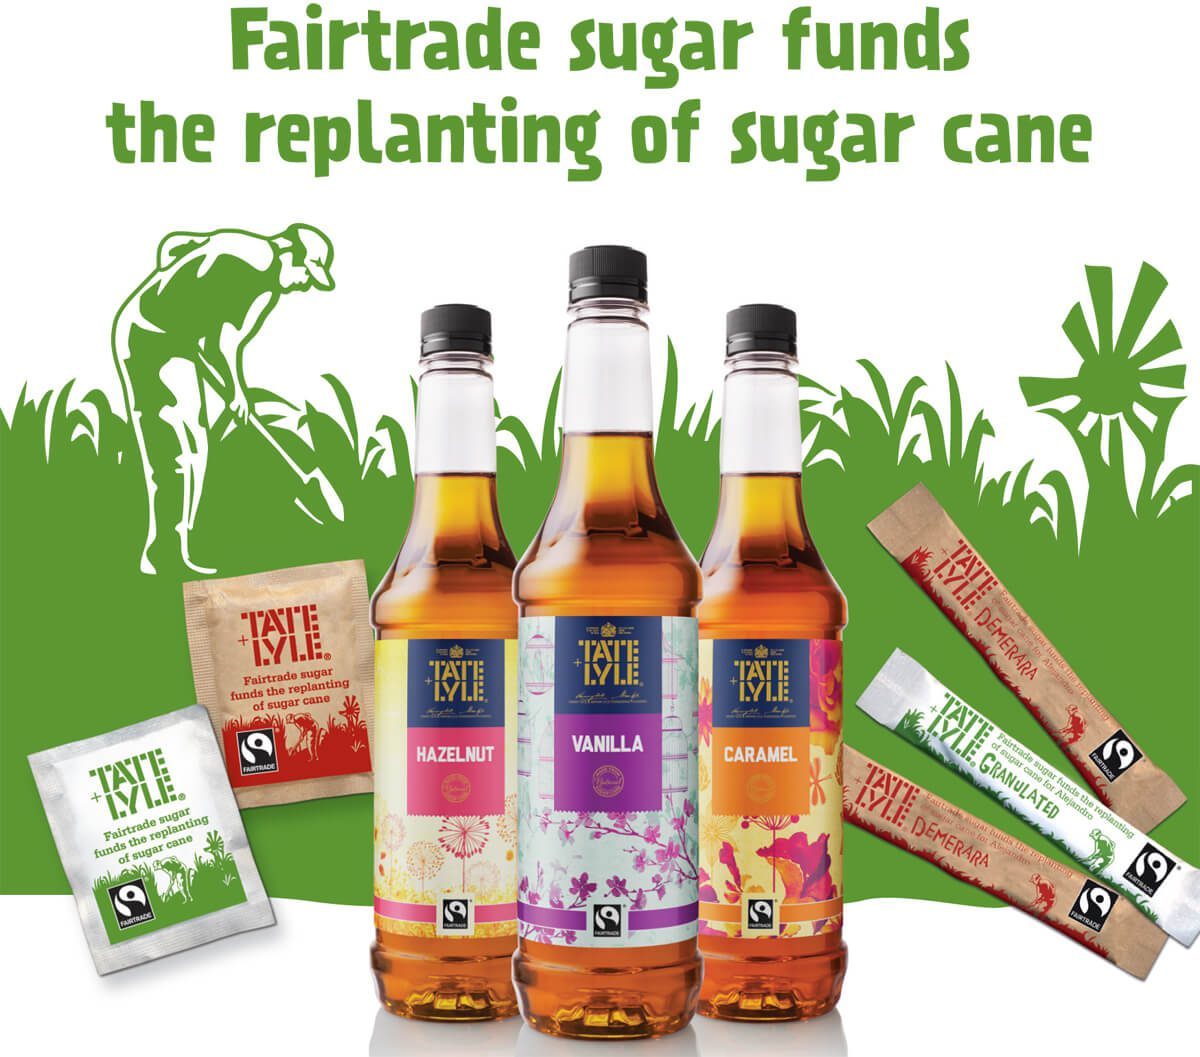 Tate and lyle fairtrade packaging design